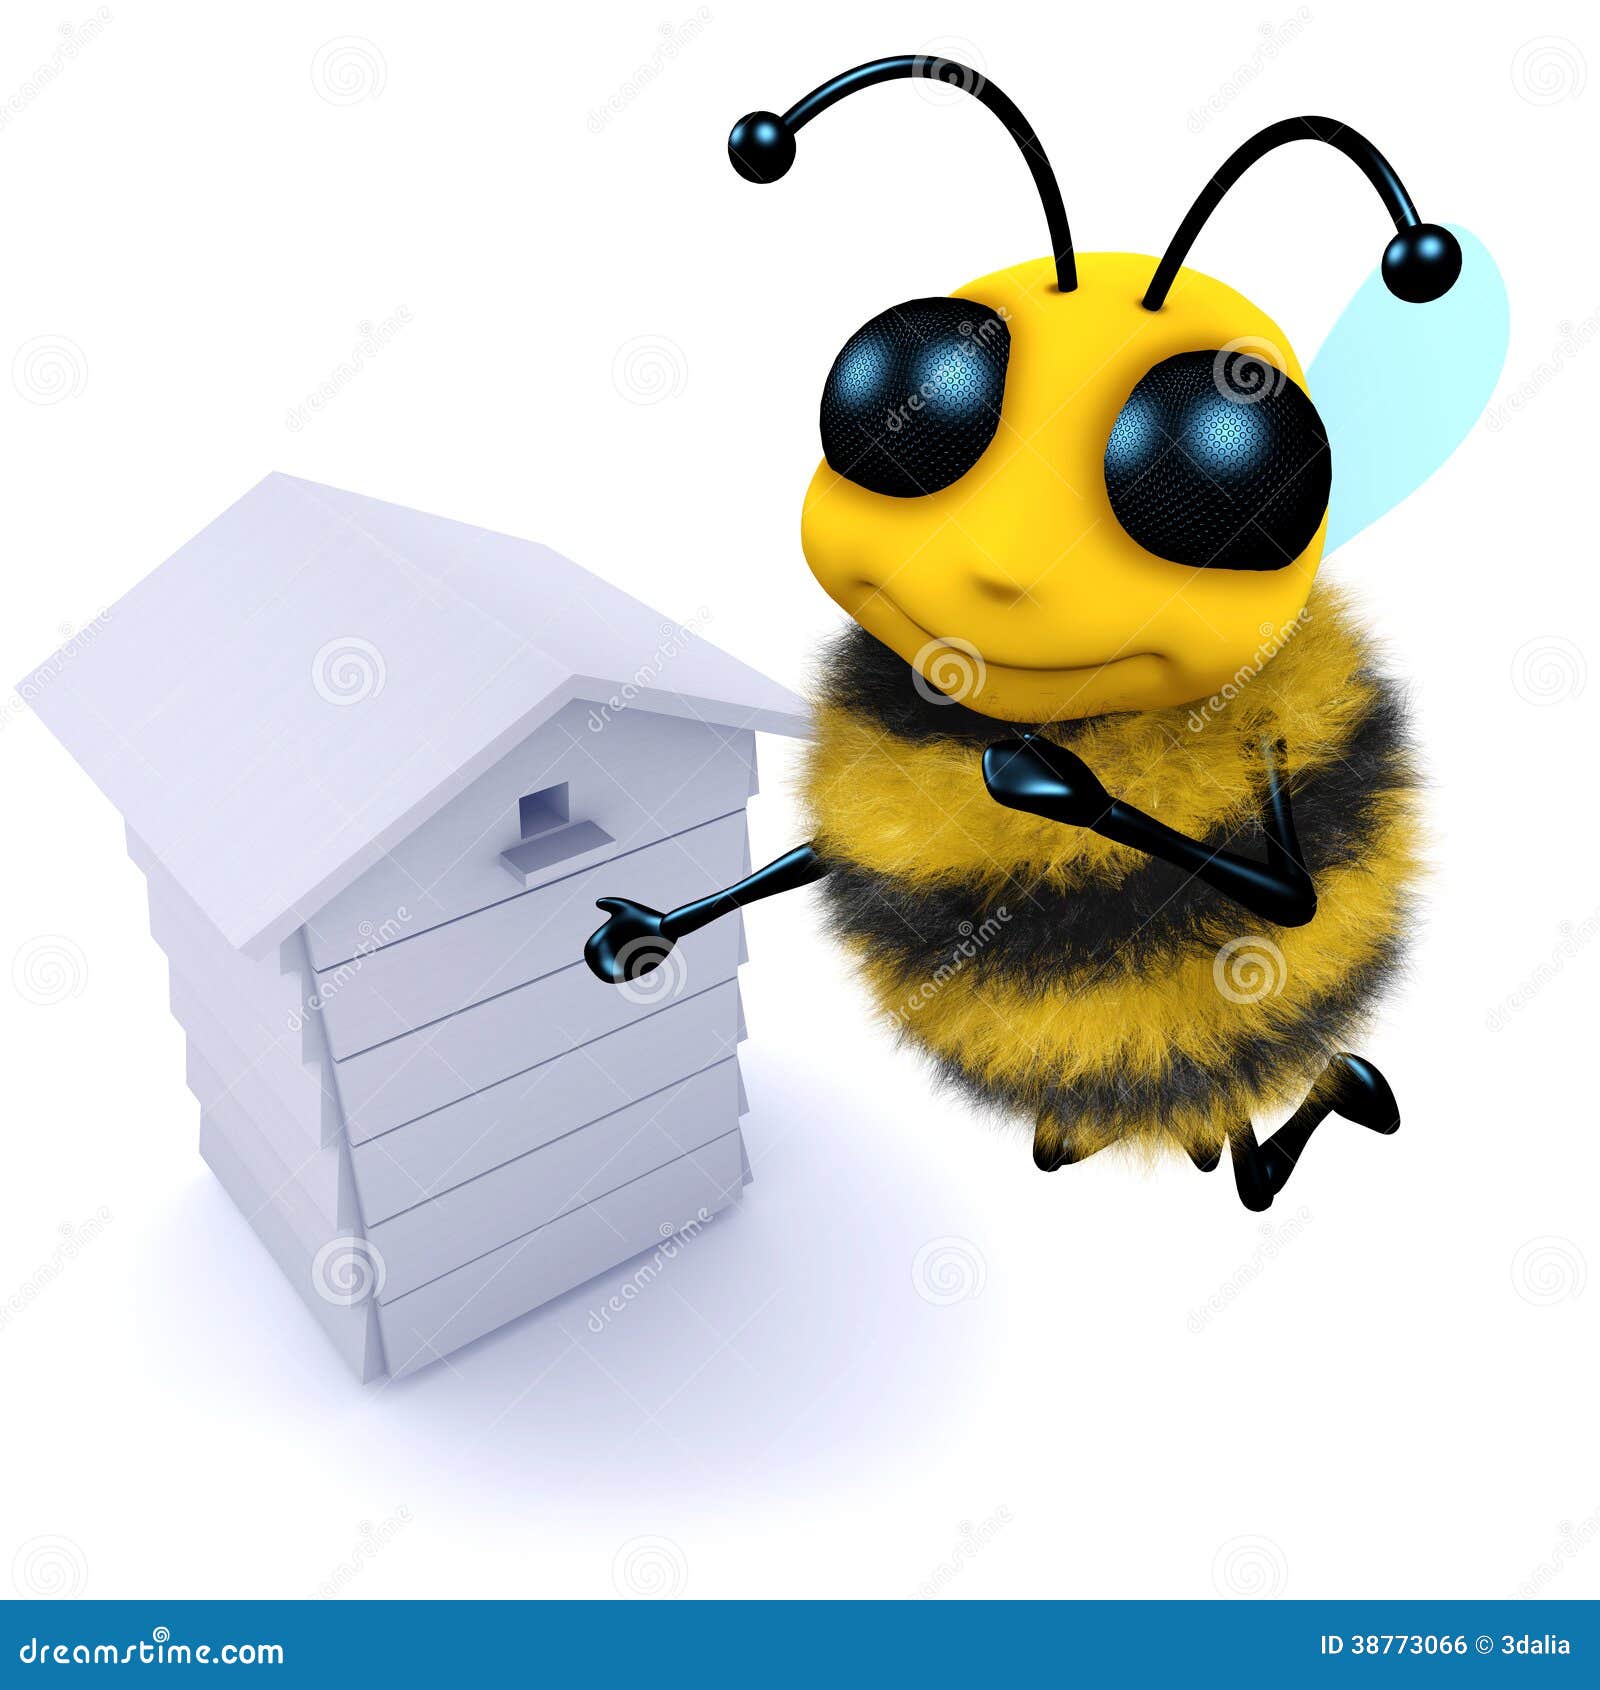 3d Bee Hive Royalty Free Stock Image - Image: 38773066